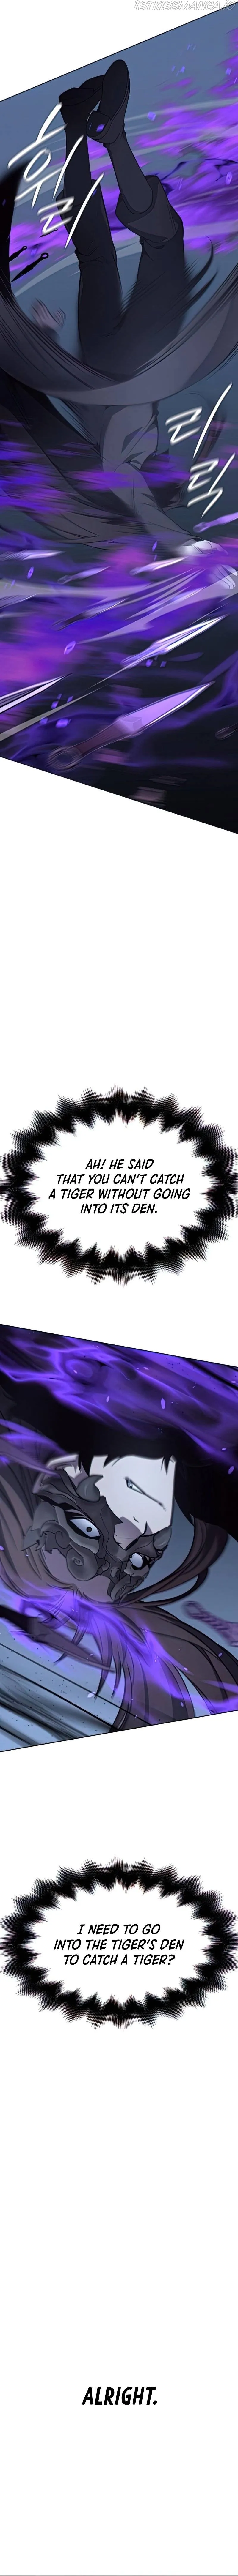 I Reincarnated As The Crazed Heir Chapter 58 page 10 - MangaWeebs.in